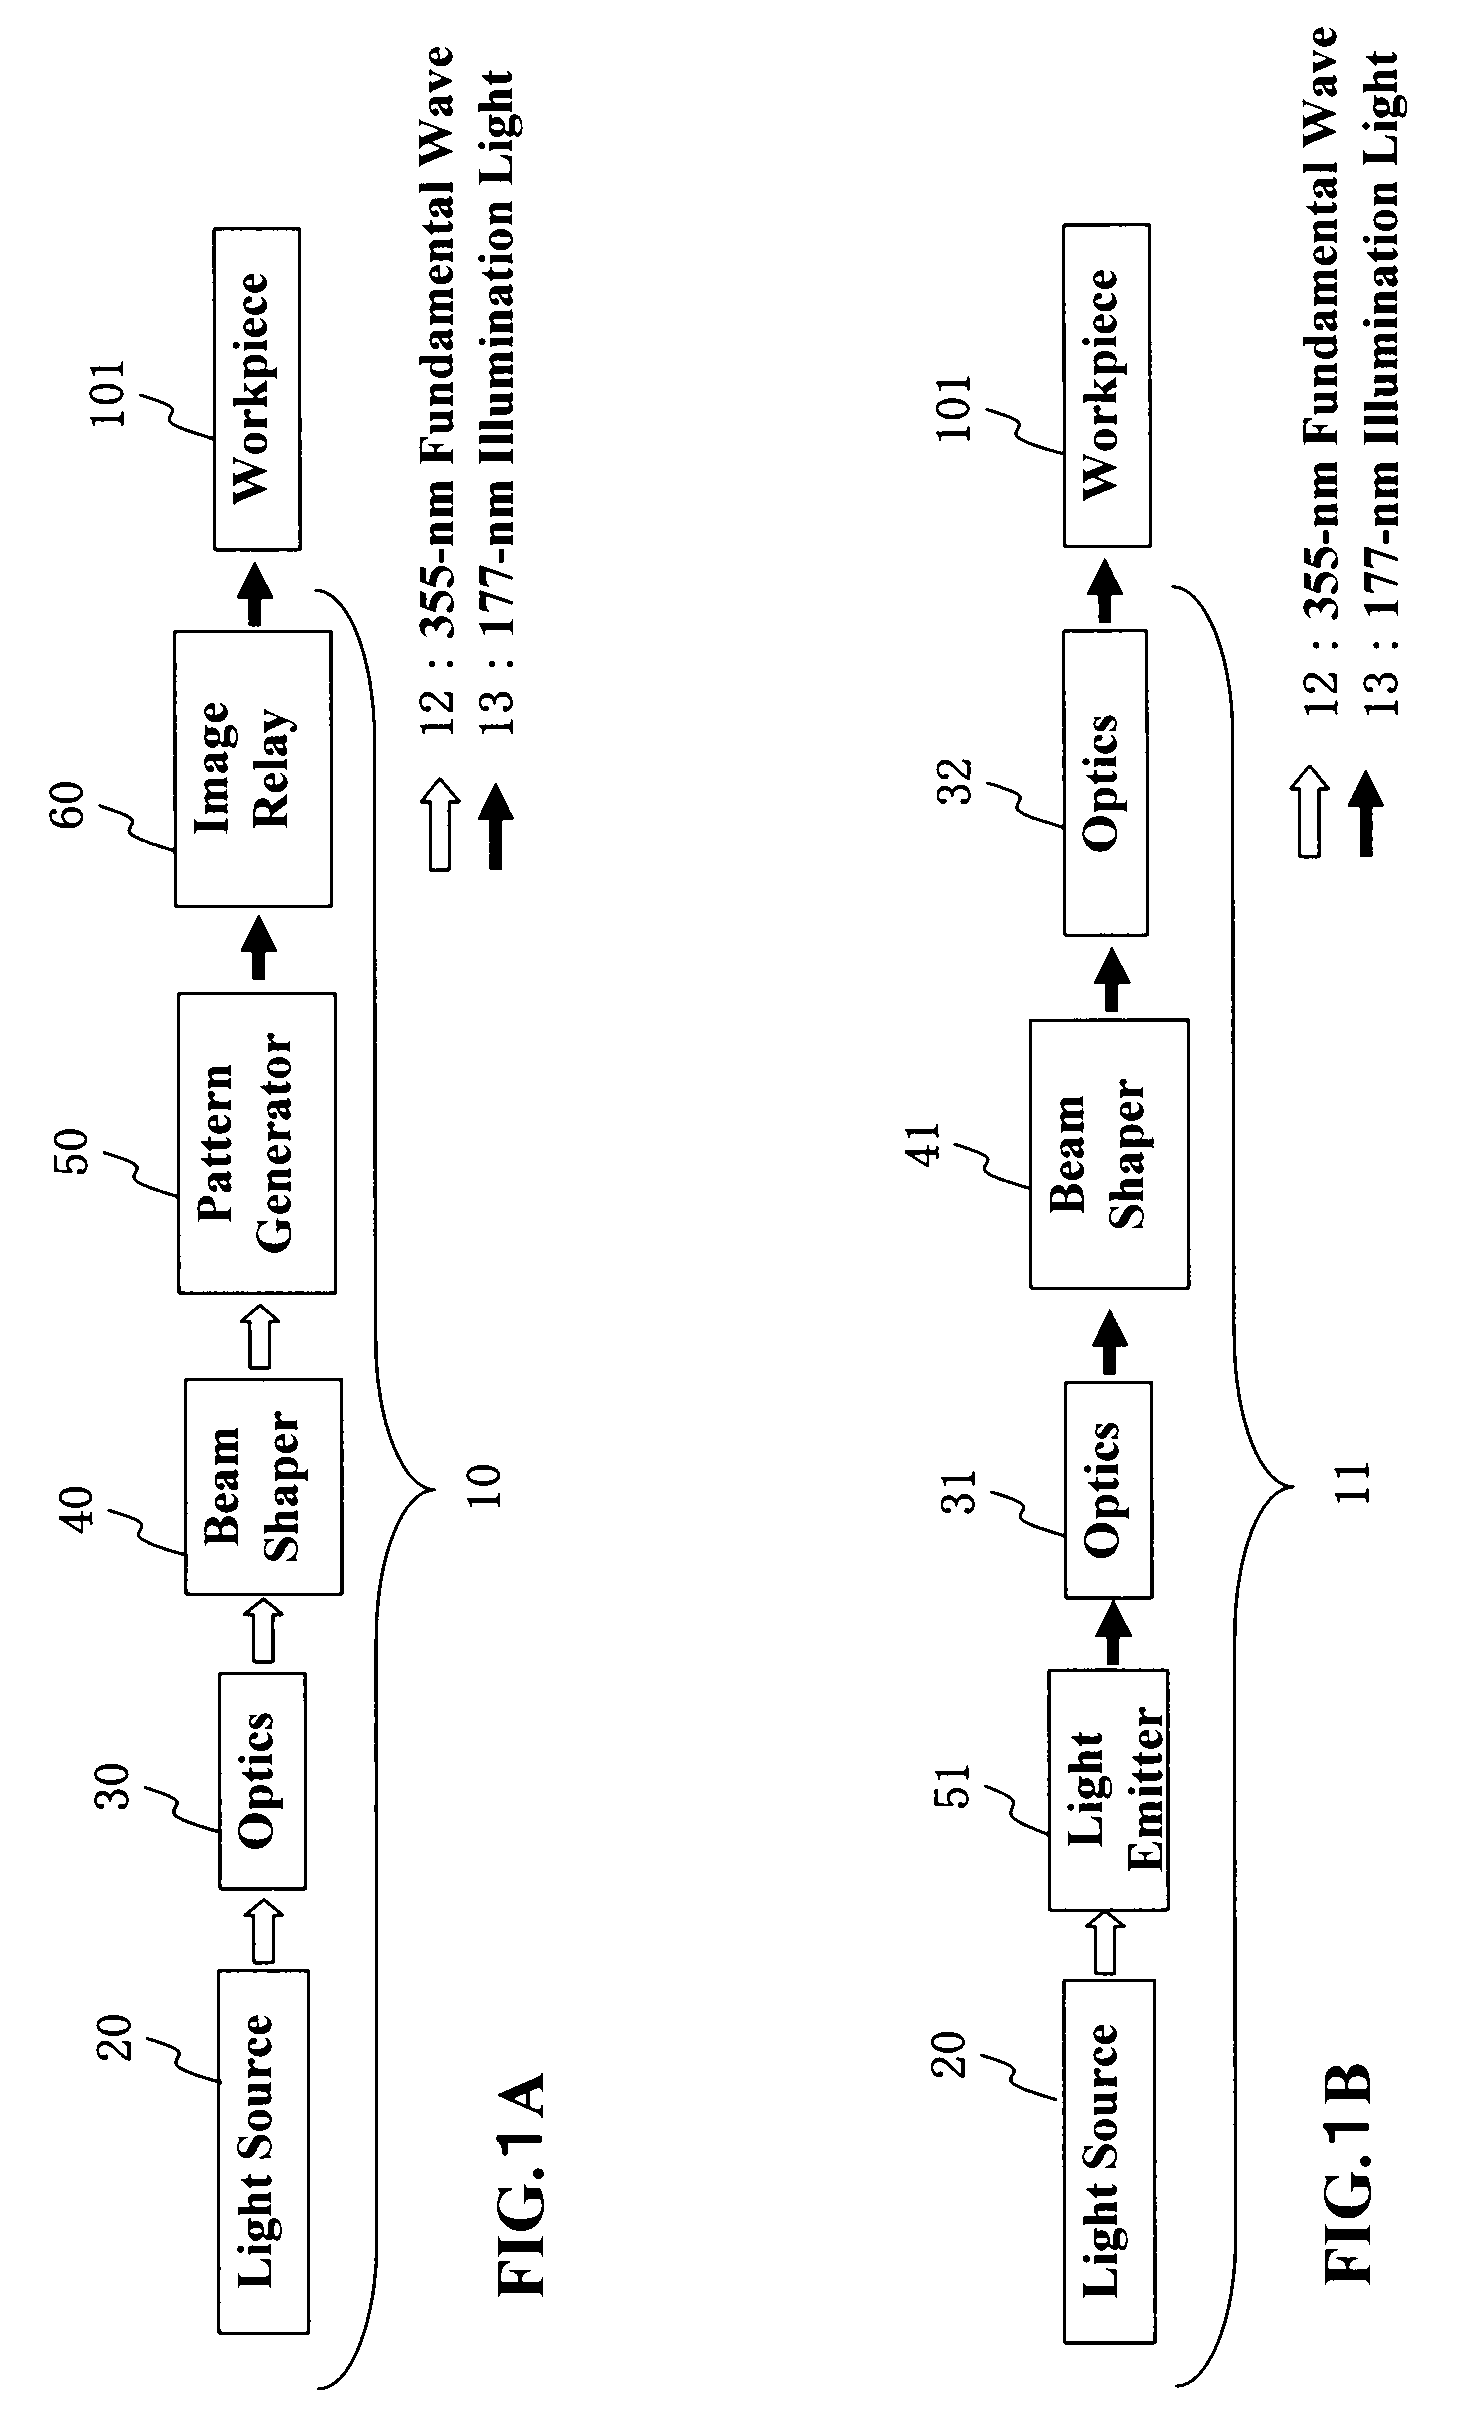 Beam irradiation apparatus with deep ultraviolet light emission device for lithographic pattern inspection system